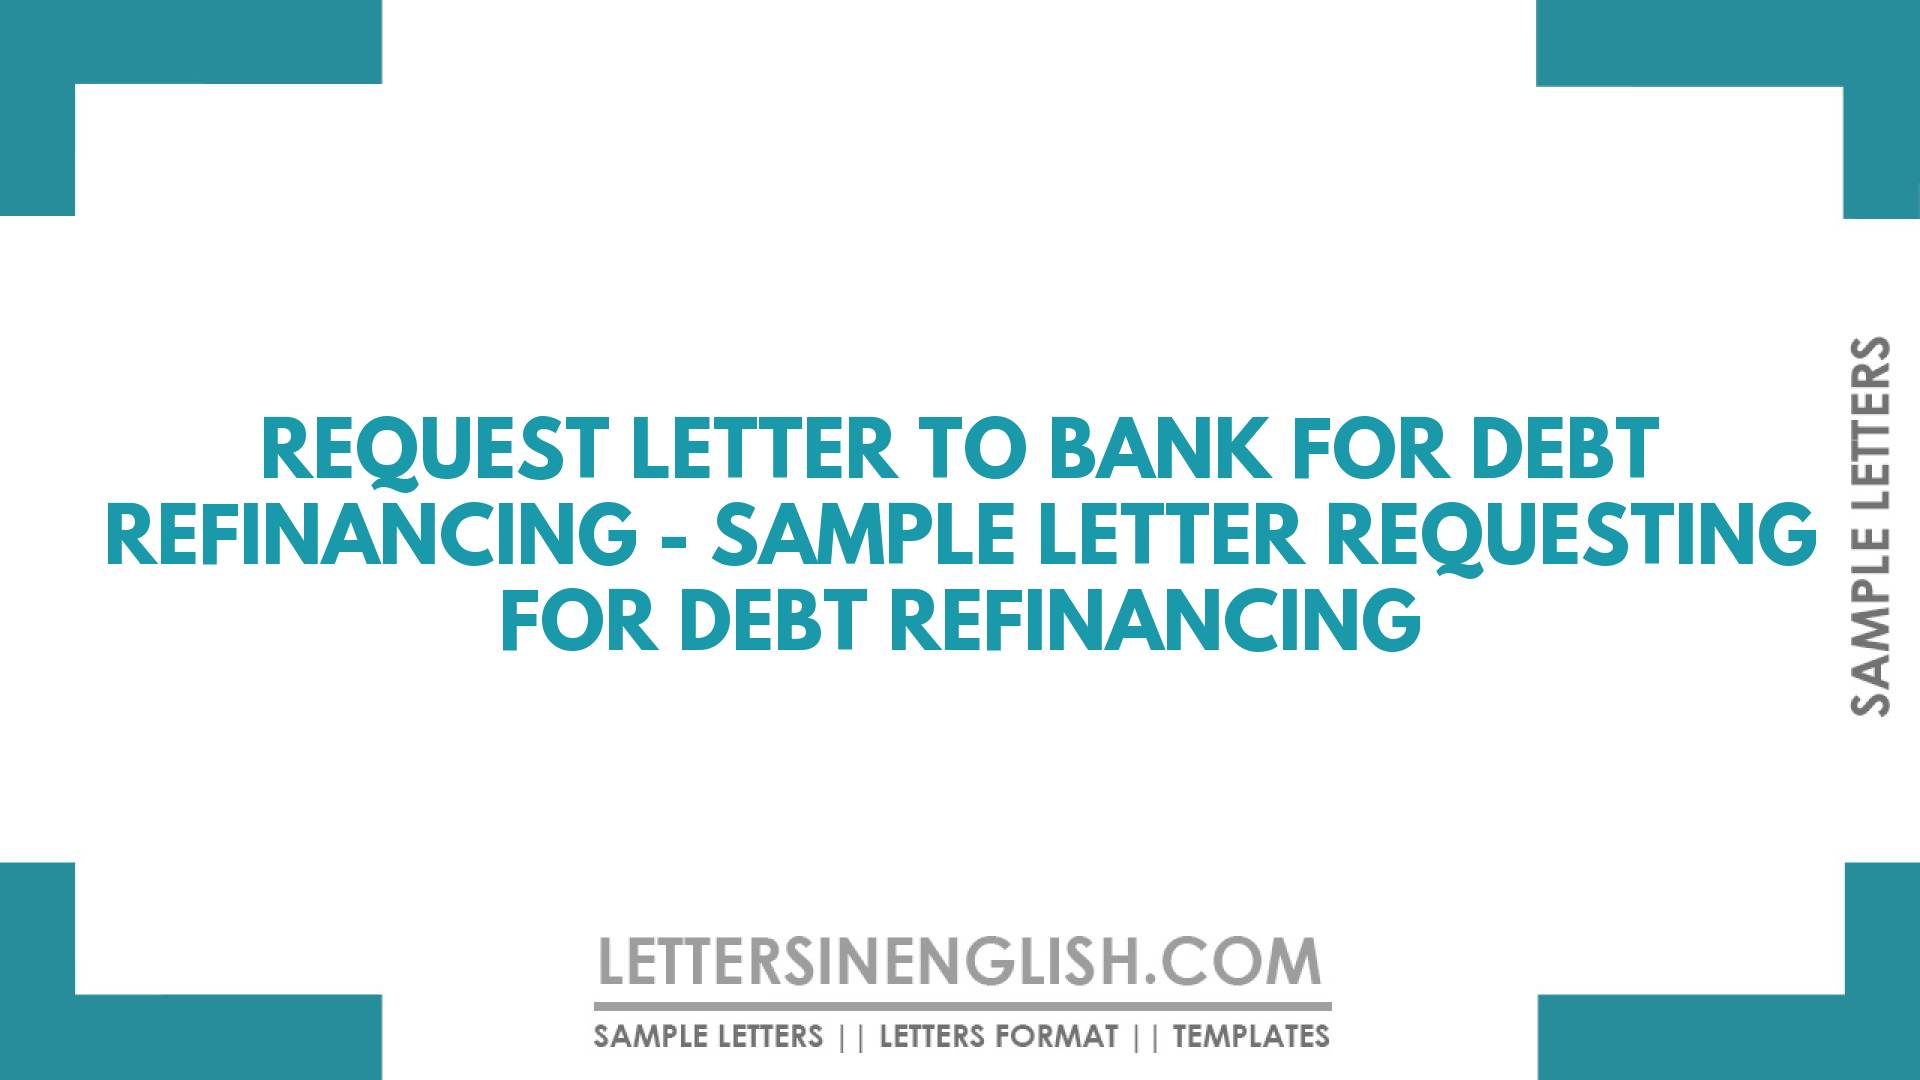 Request Letter to Bank for Debt Refinancing – Sample Letter Requesting for Debt Refinancing